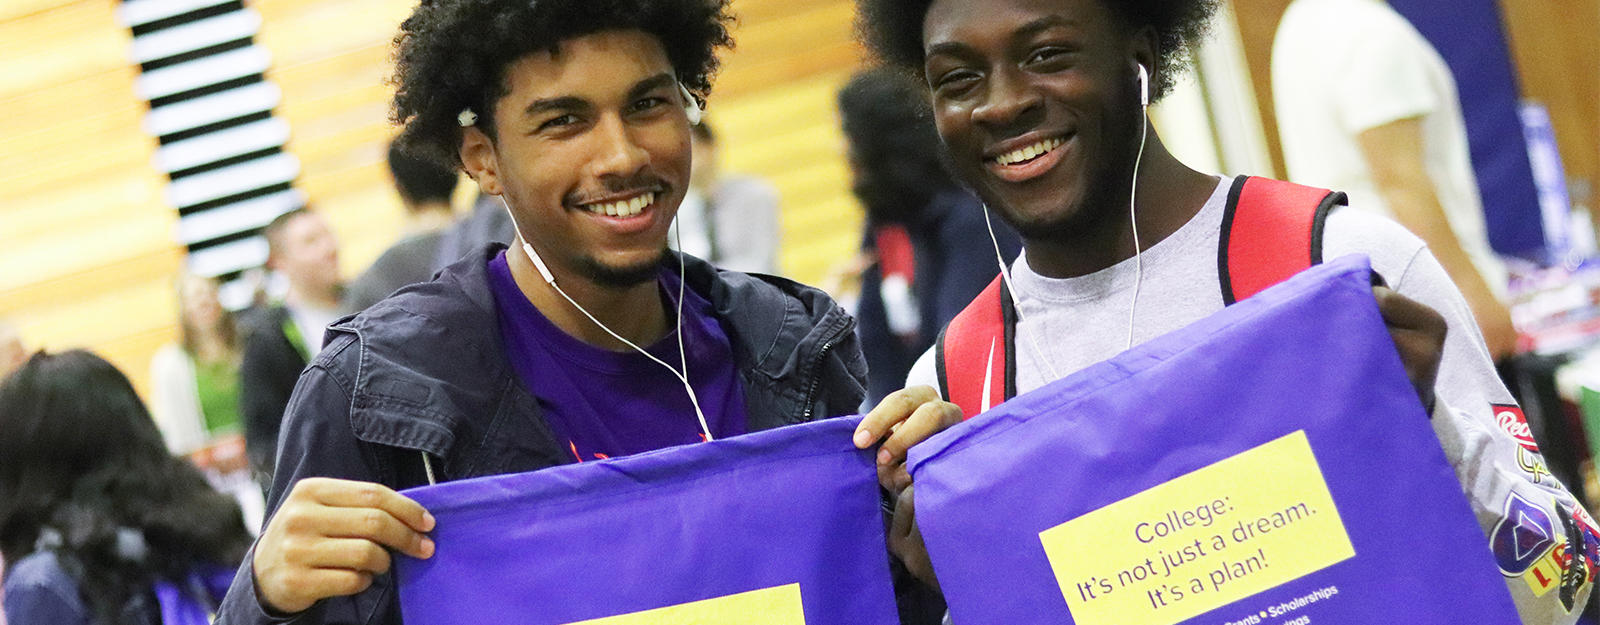 Two students holding up college drawstring bags.